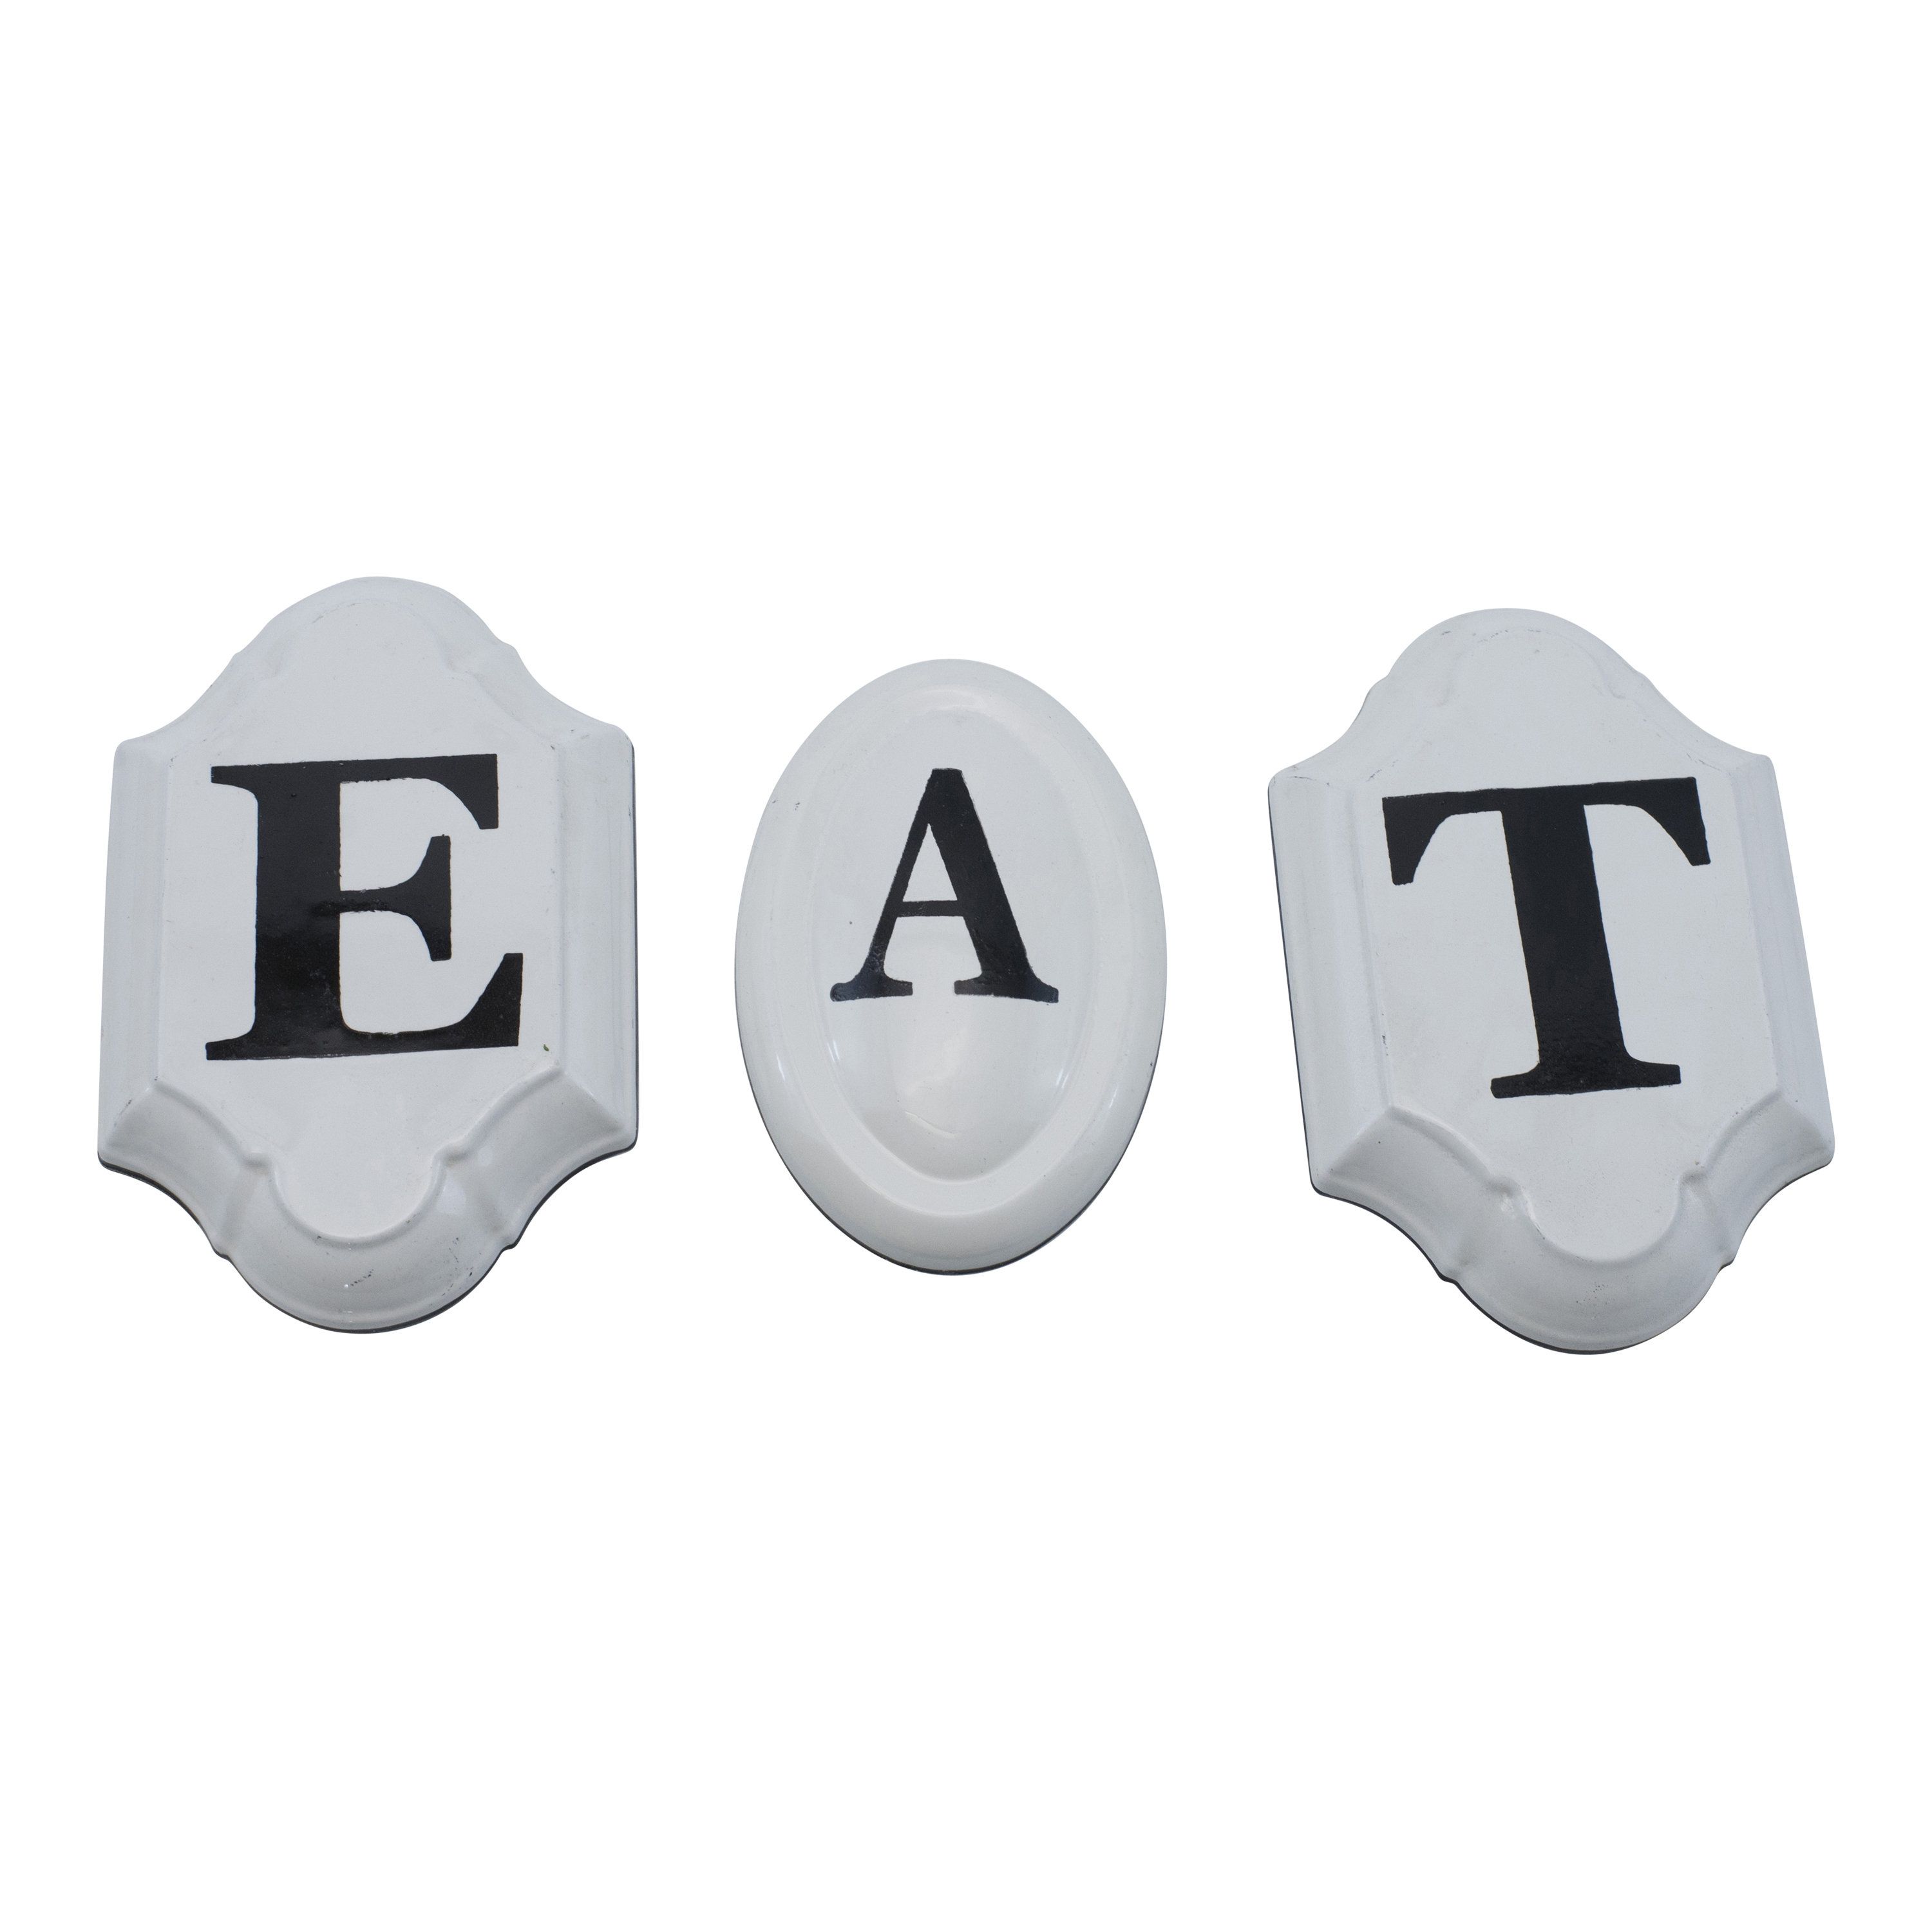 3 Piece Vintage Farmhouse Style Sign Wall Décor Set For Grey &quot;eat&quot; Sign With Rebar Decor (View 8 of 30)